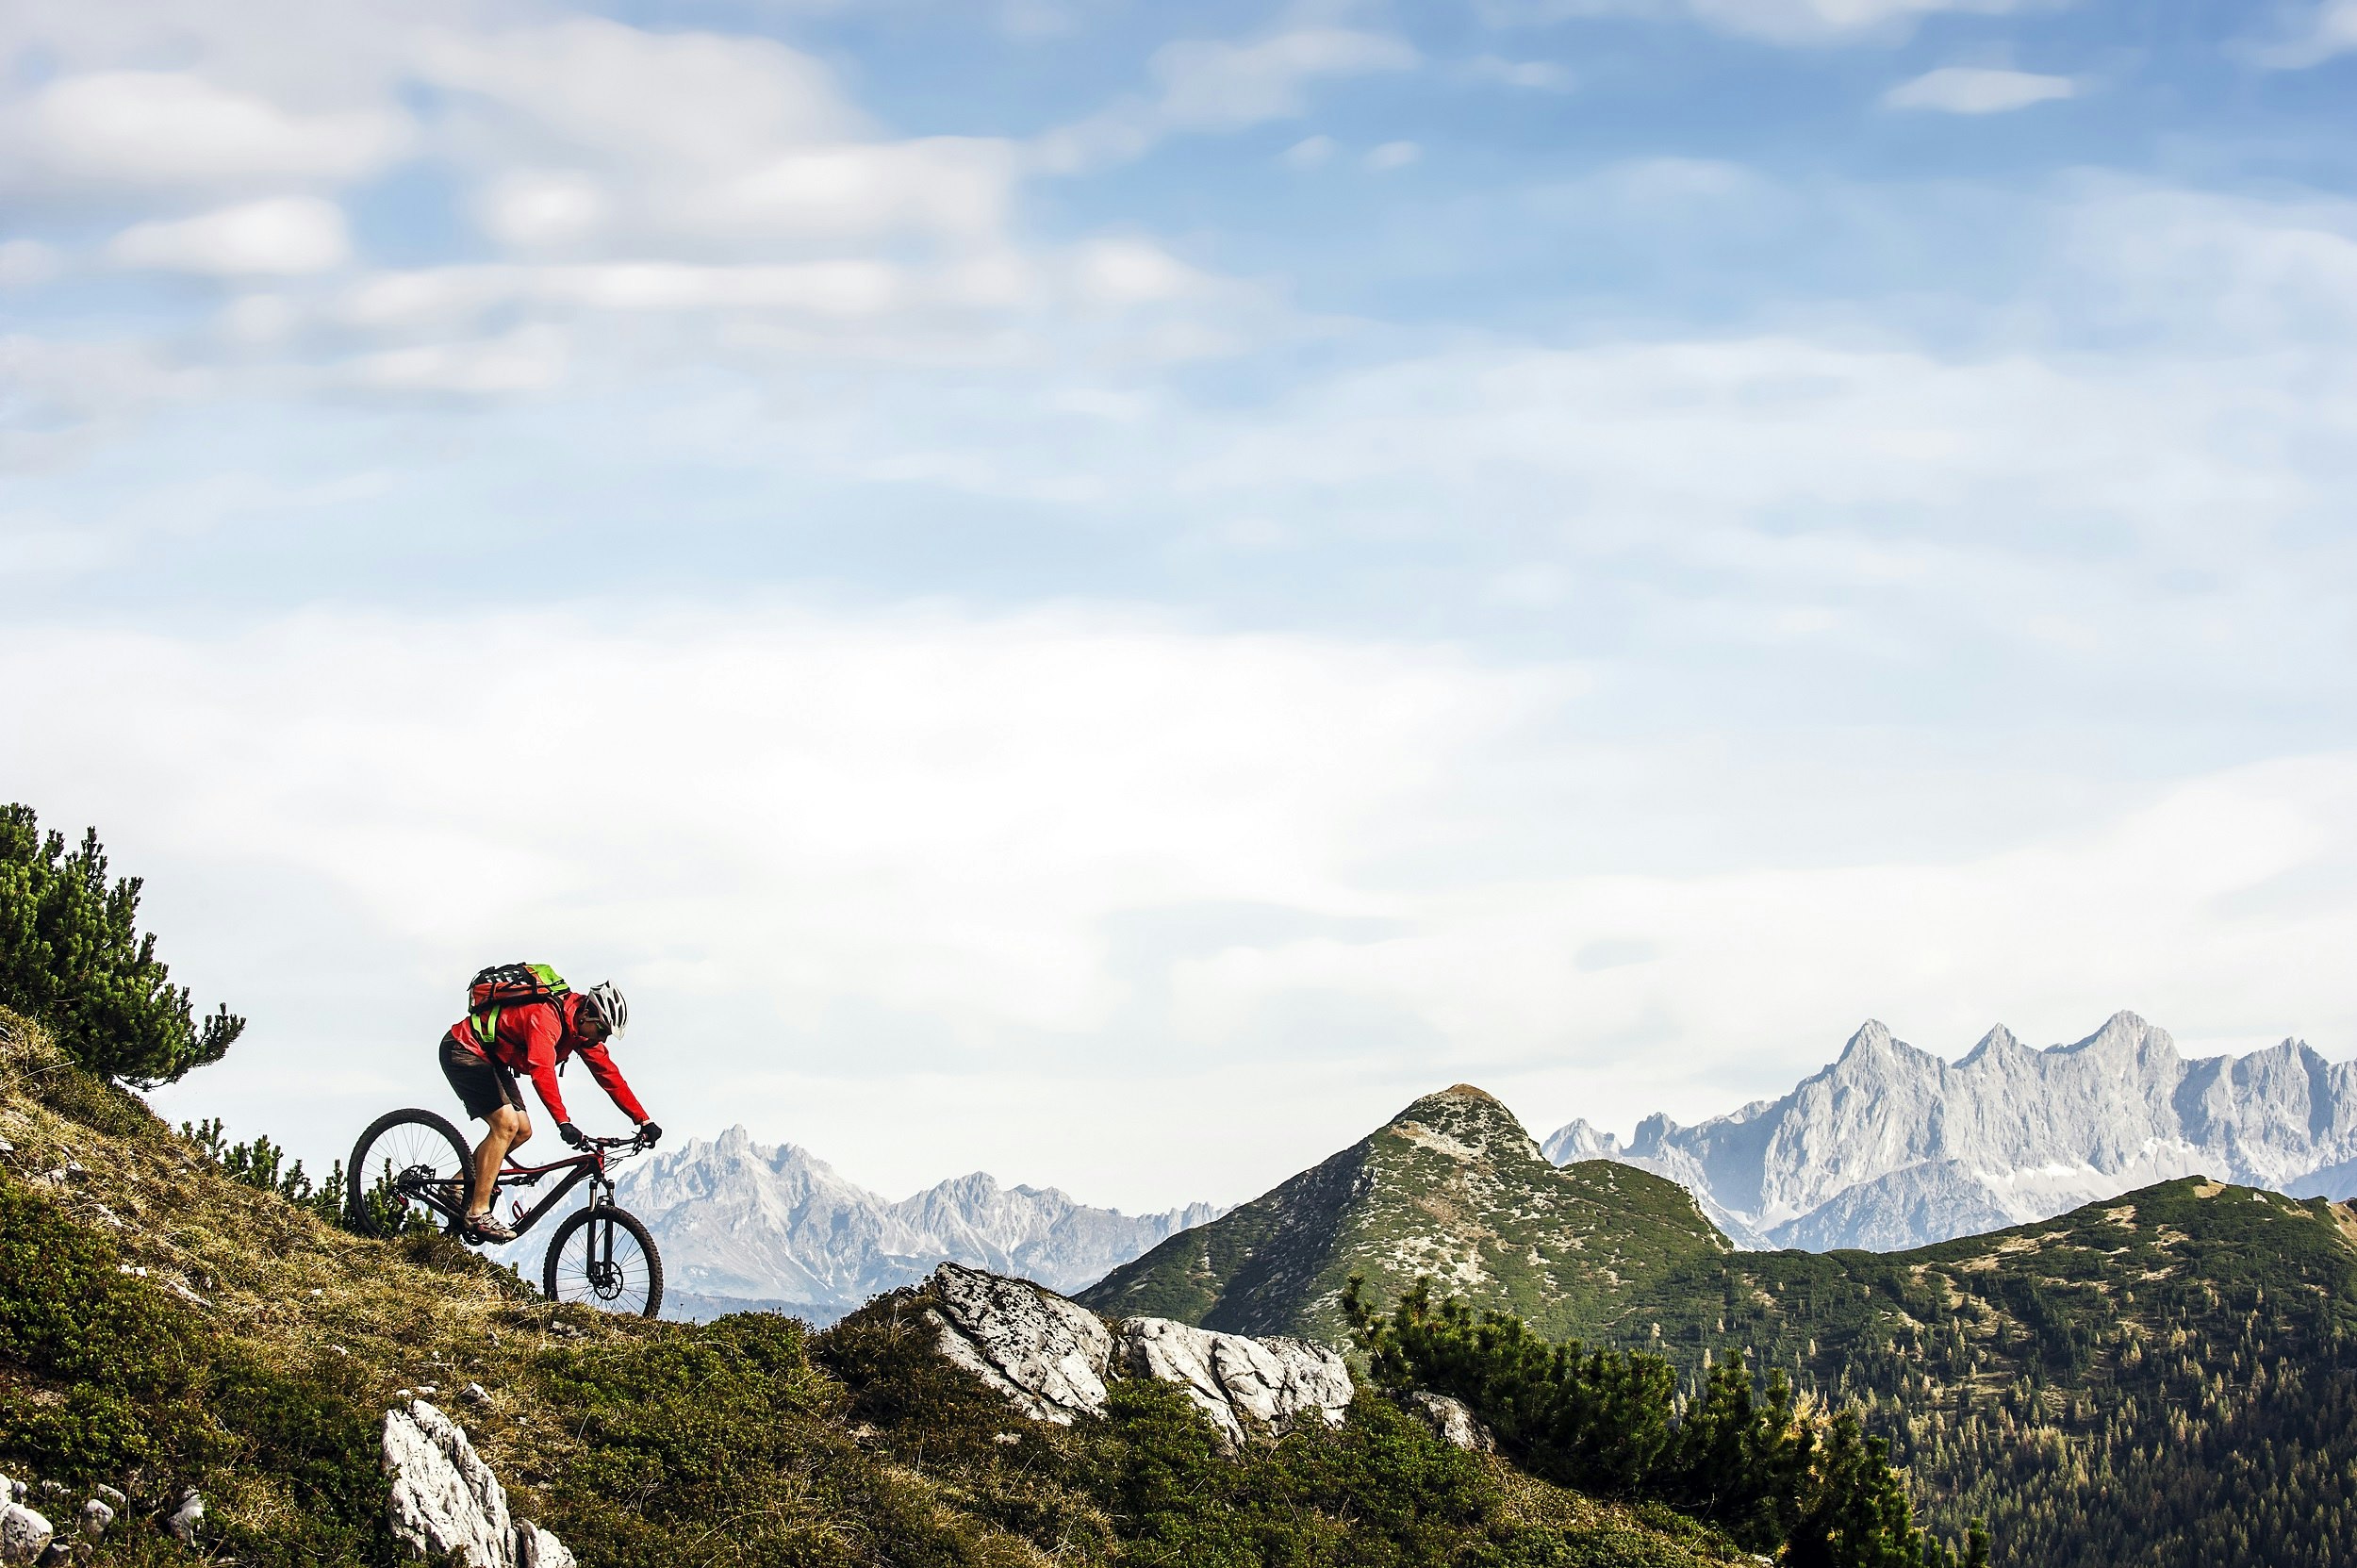 A mountain biker descends a slope covered in grass, rocks and alpine vegetation; in the background is a green hill, which is backed in the distance by a jagged ridge of rocky Alps peaks.